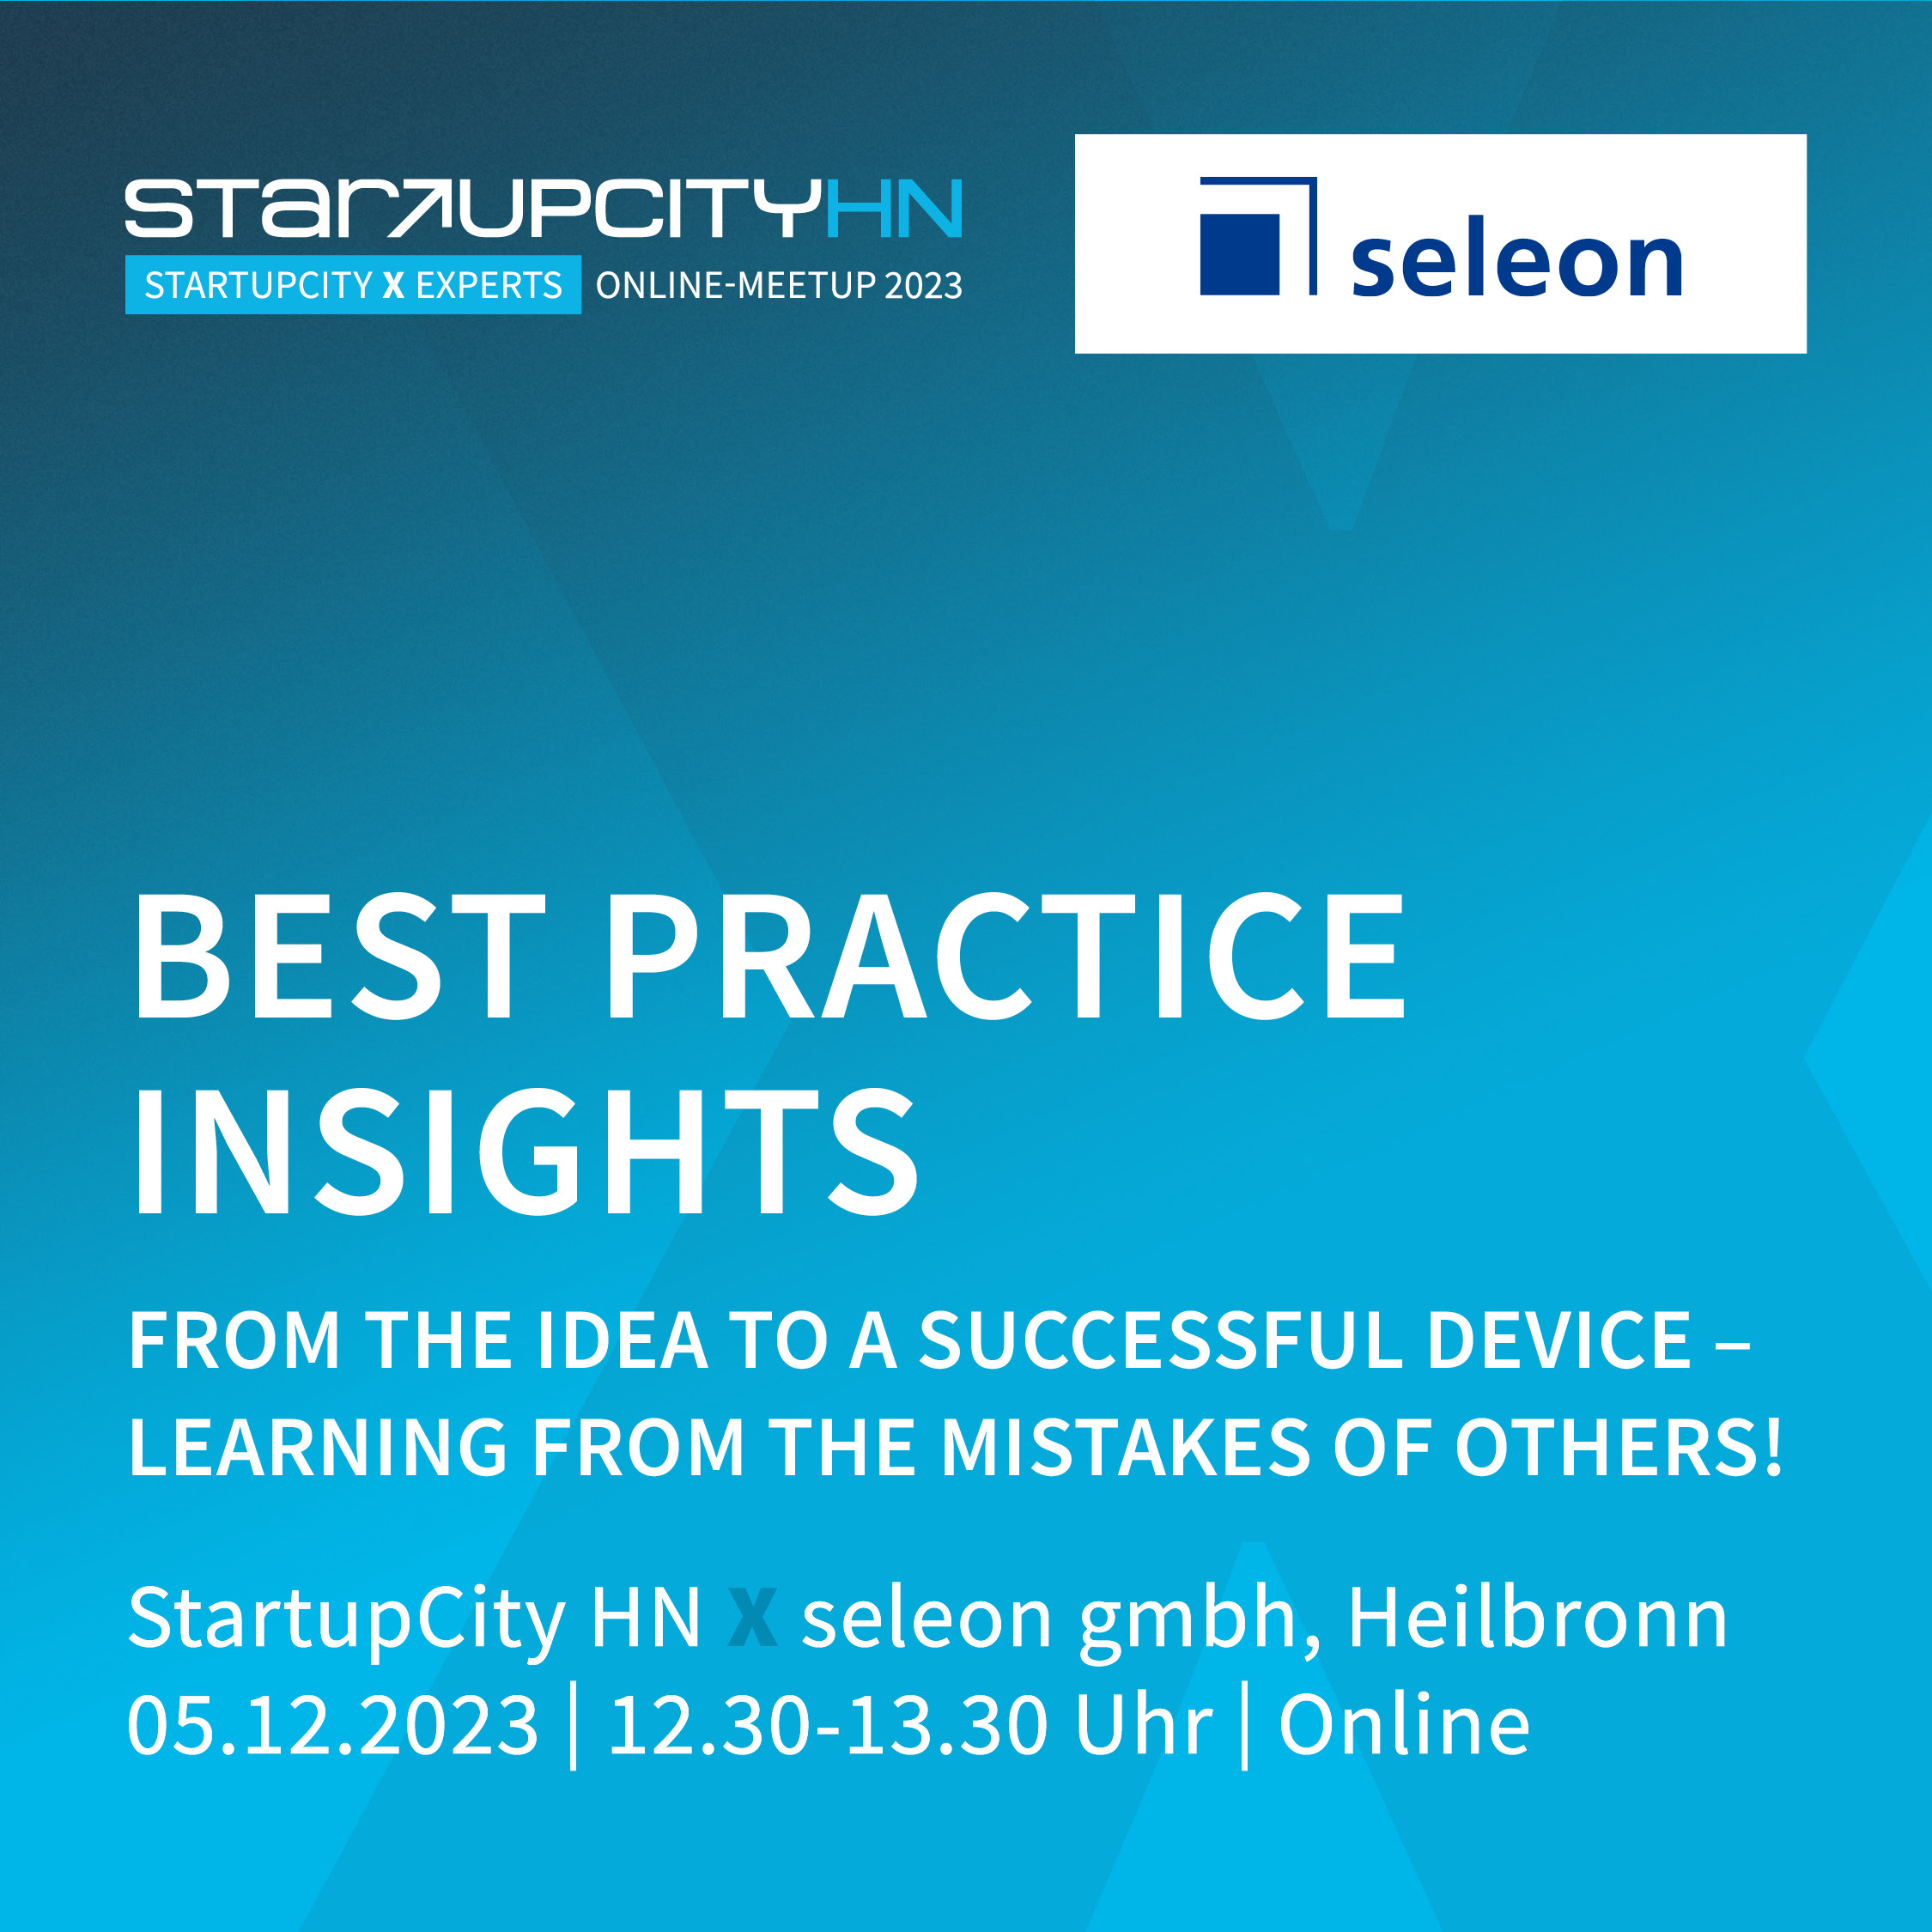 BEST PRACTICE INSIGHTS – FROM THE IDEA TO A SUCCESSFUL DEVICE – LEARNING FROM THE MISTAKES OF OTHERS!